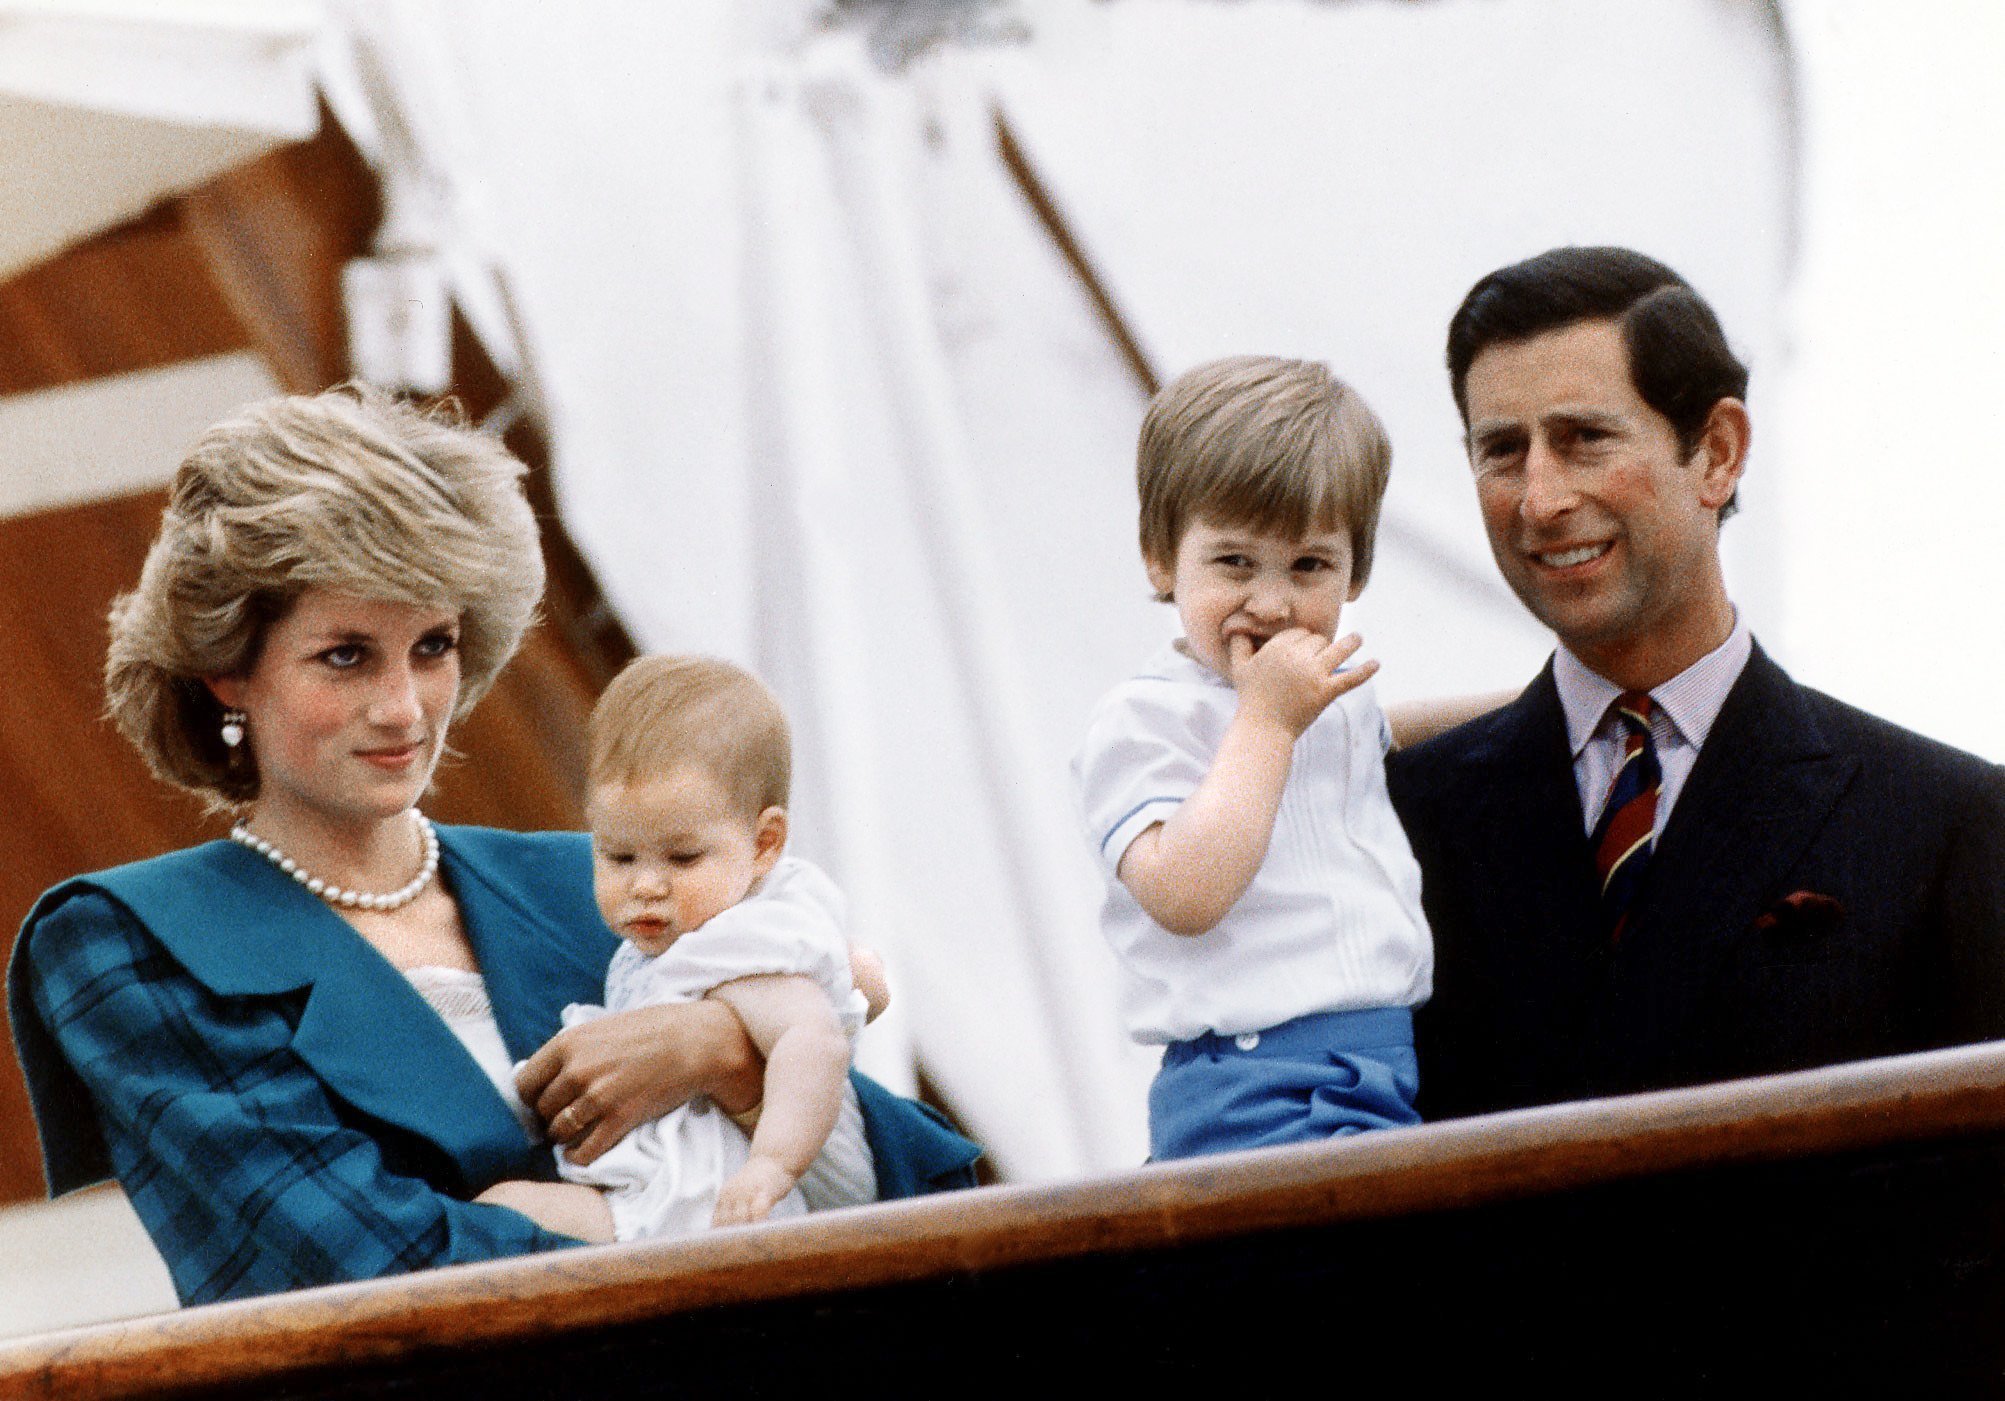 Princess Diana and Prince Charles pose with their sons Princes Harry and William on board royal yacht Britannia during their visit to Venice, Italy, 6th May 1985 | Source: Getty Images